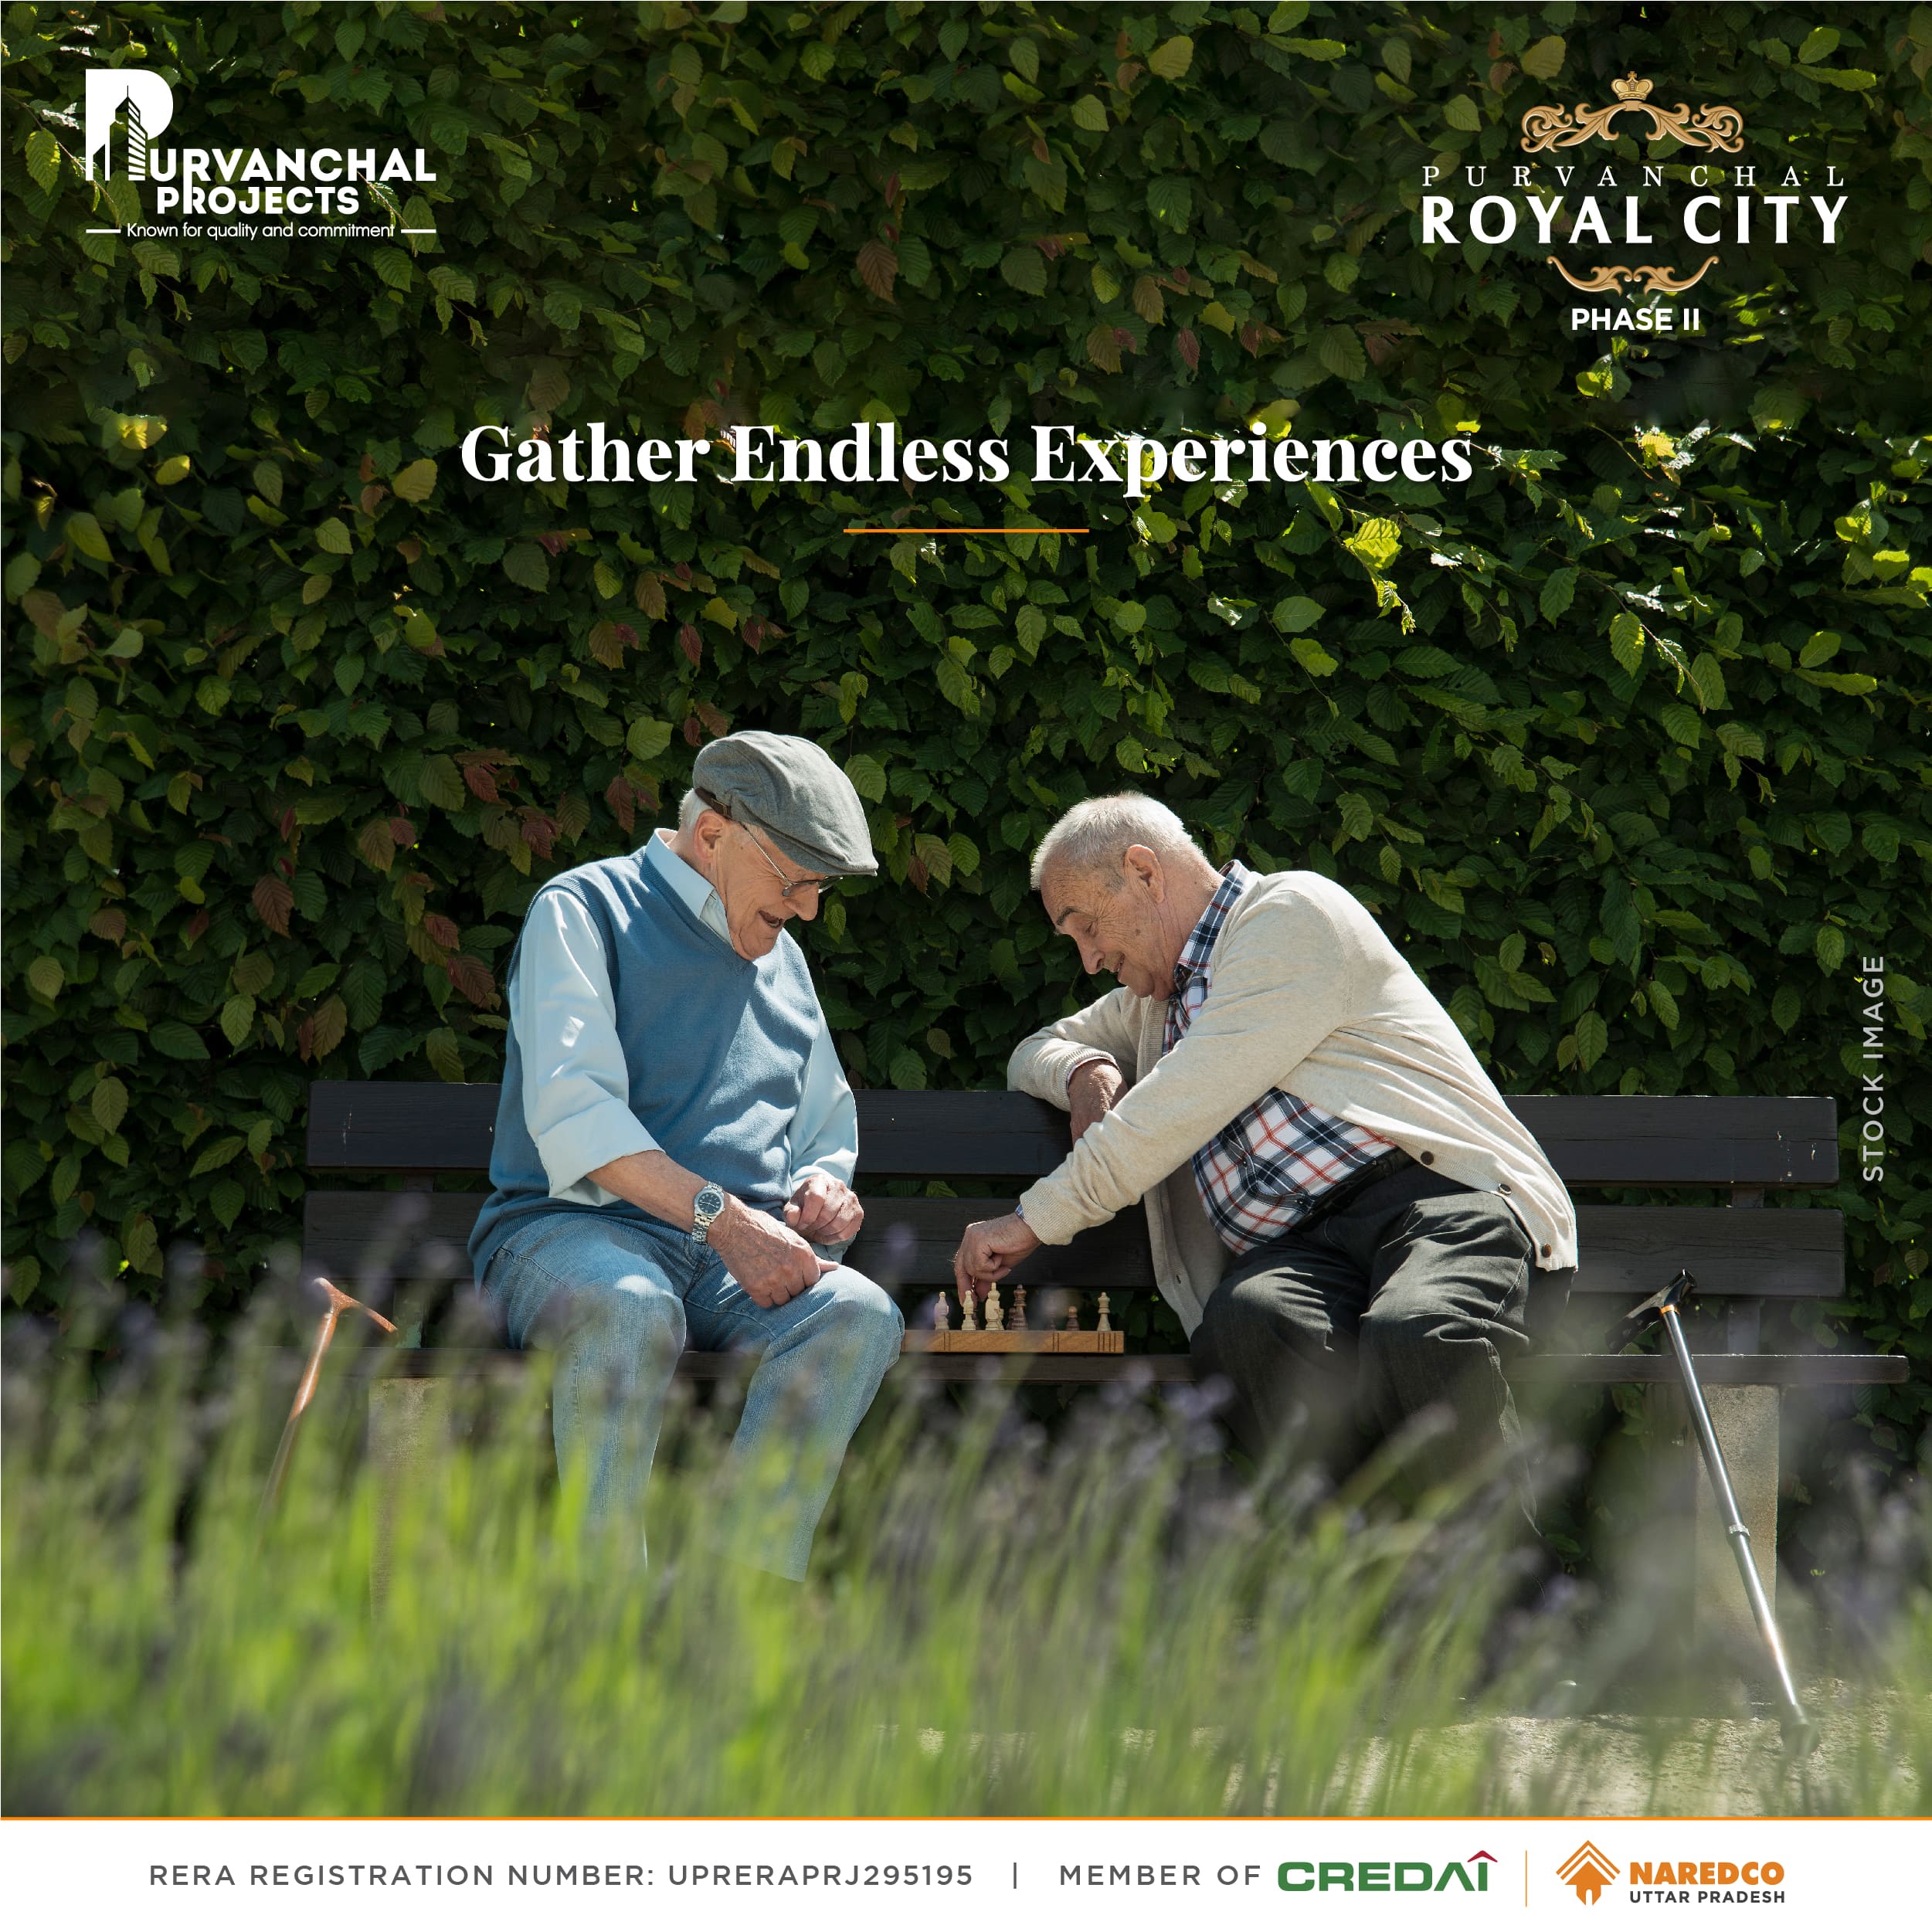 How Purvanchal Royal City Phase II Supports Seniors' Well-Being And Quality of Life